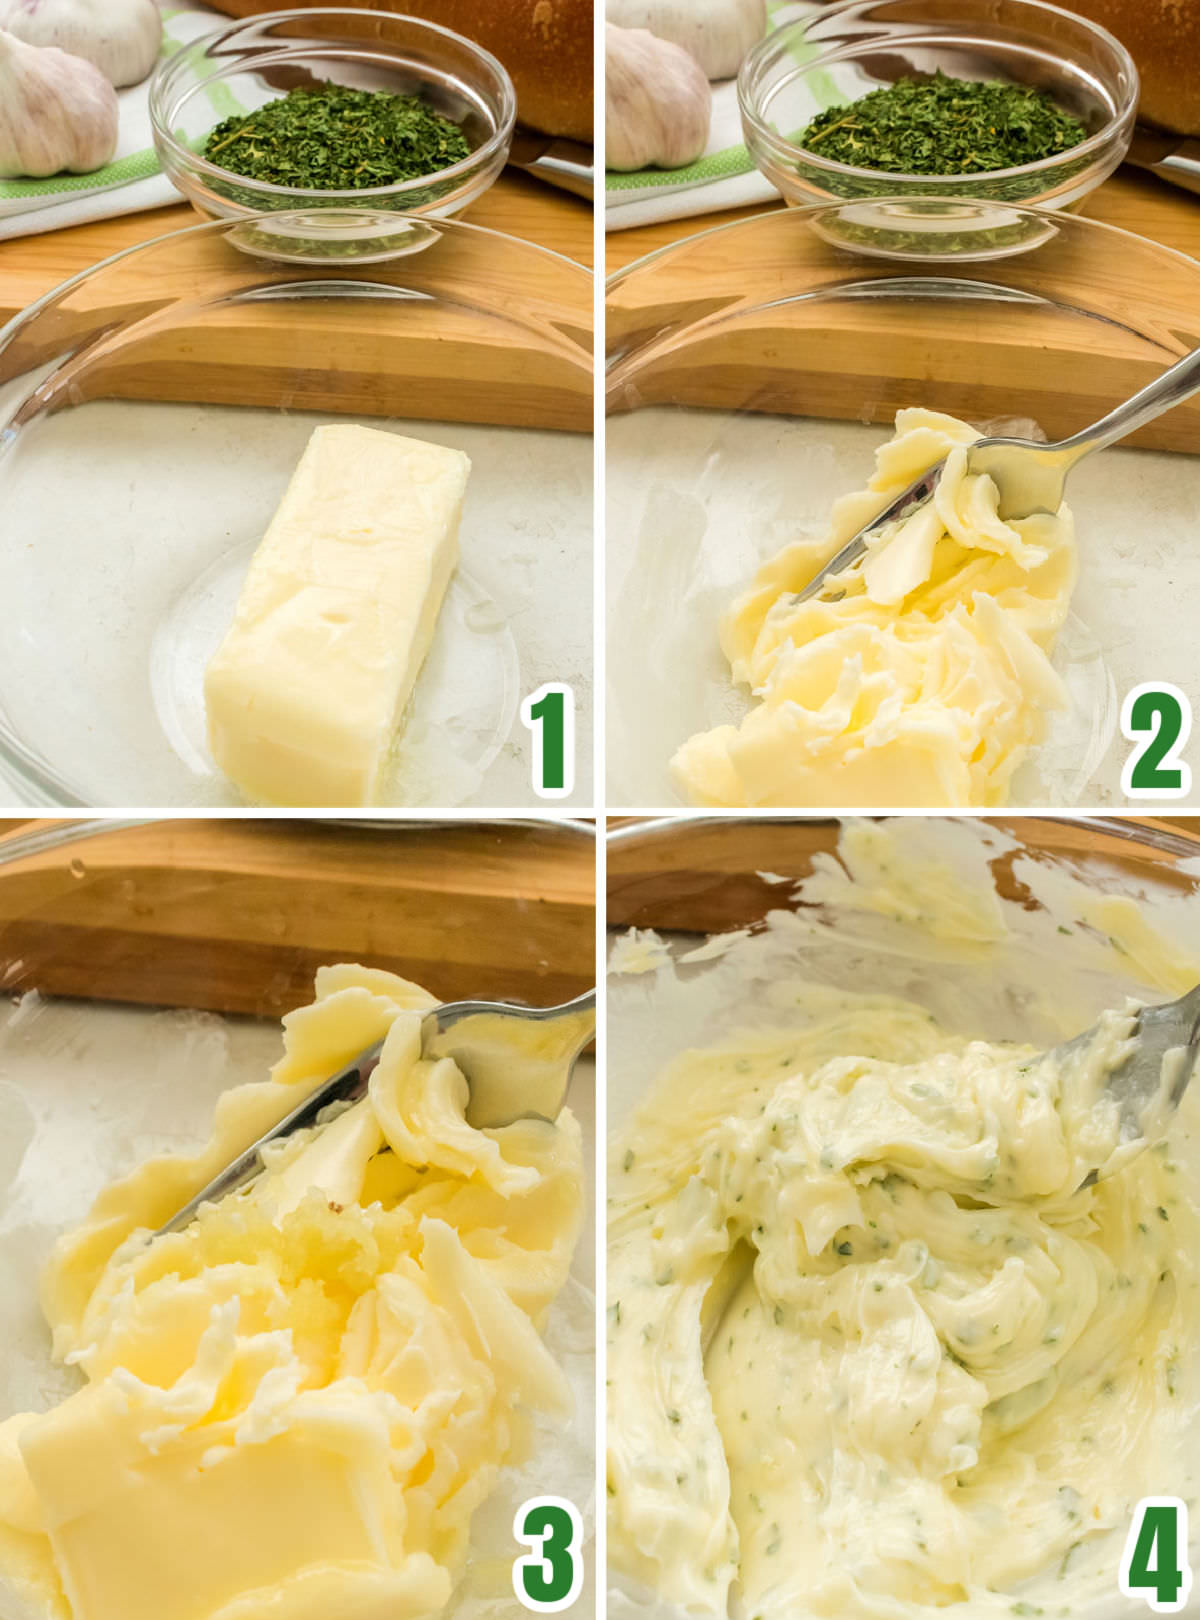 Collage image showing the steps for making Garlic Butter.